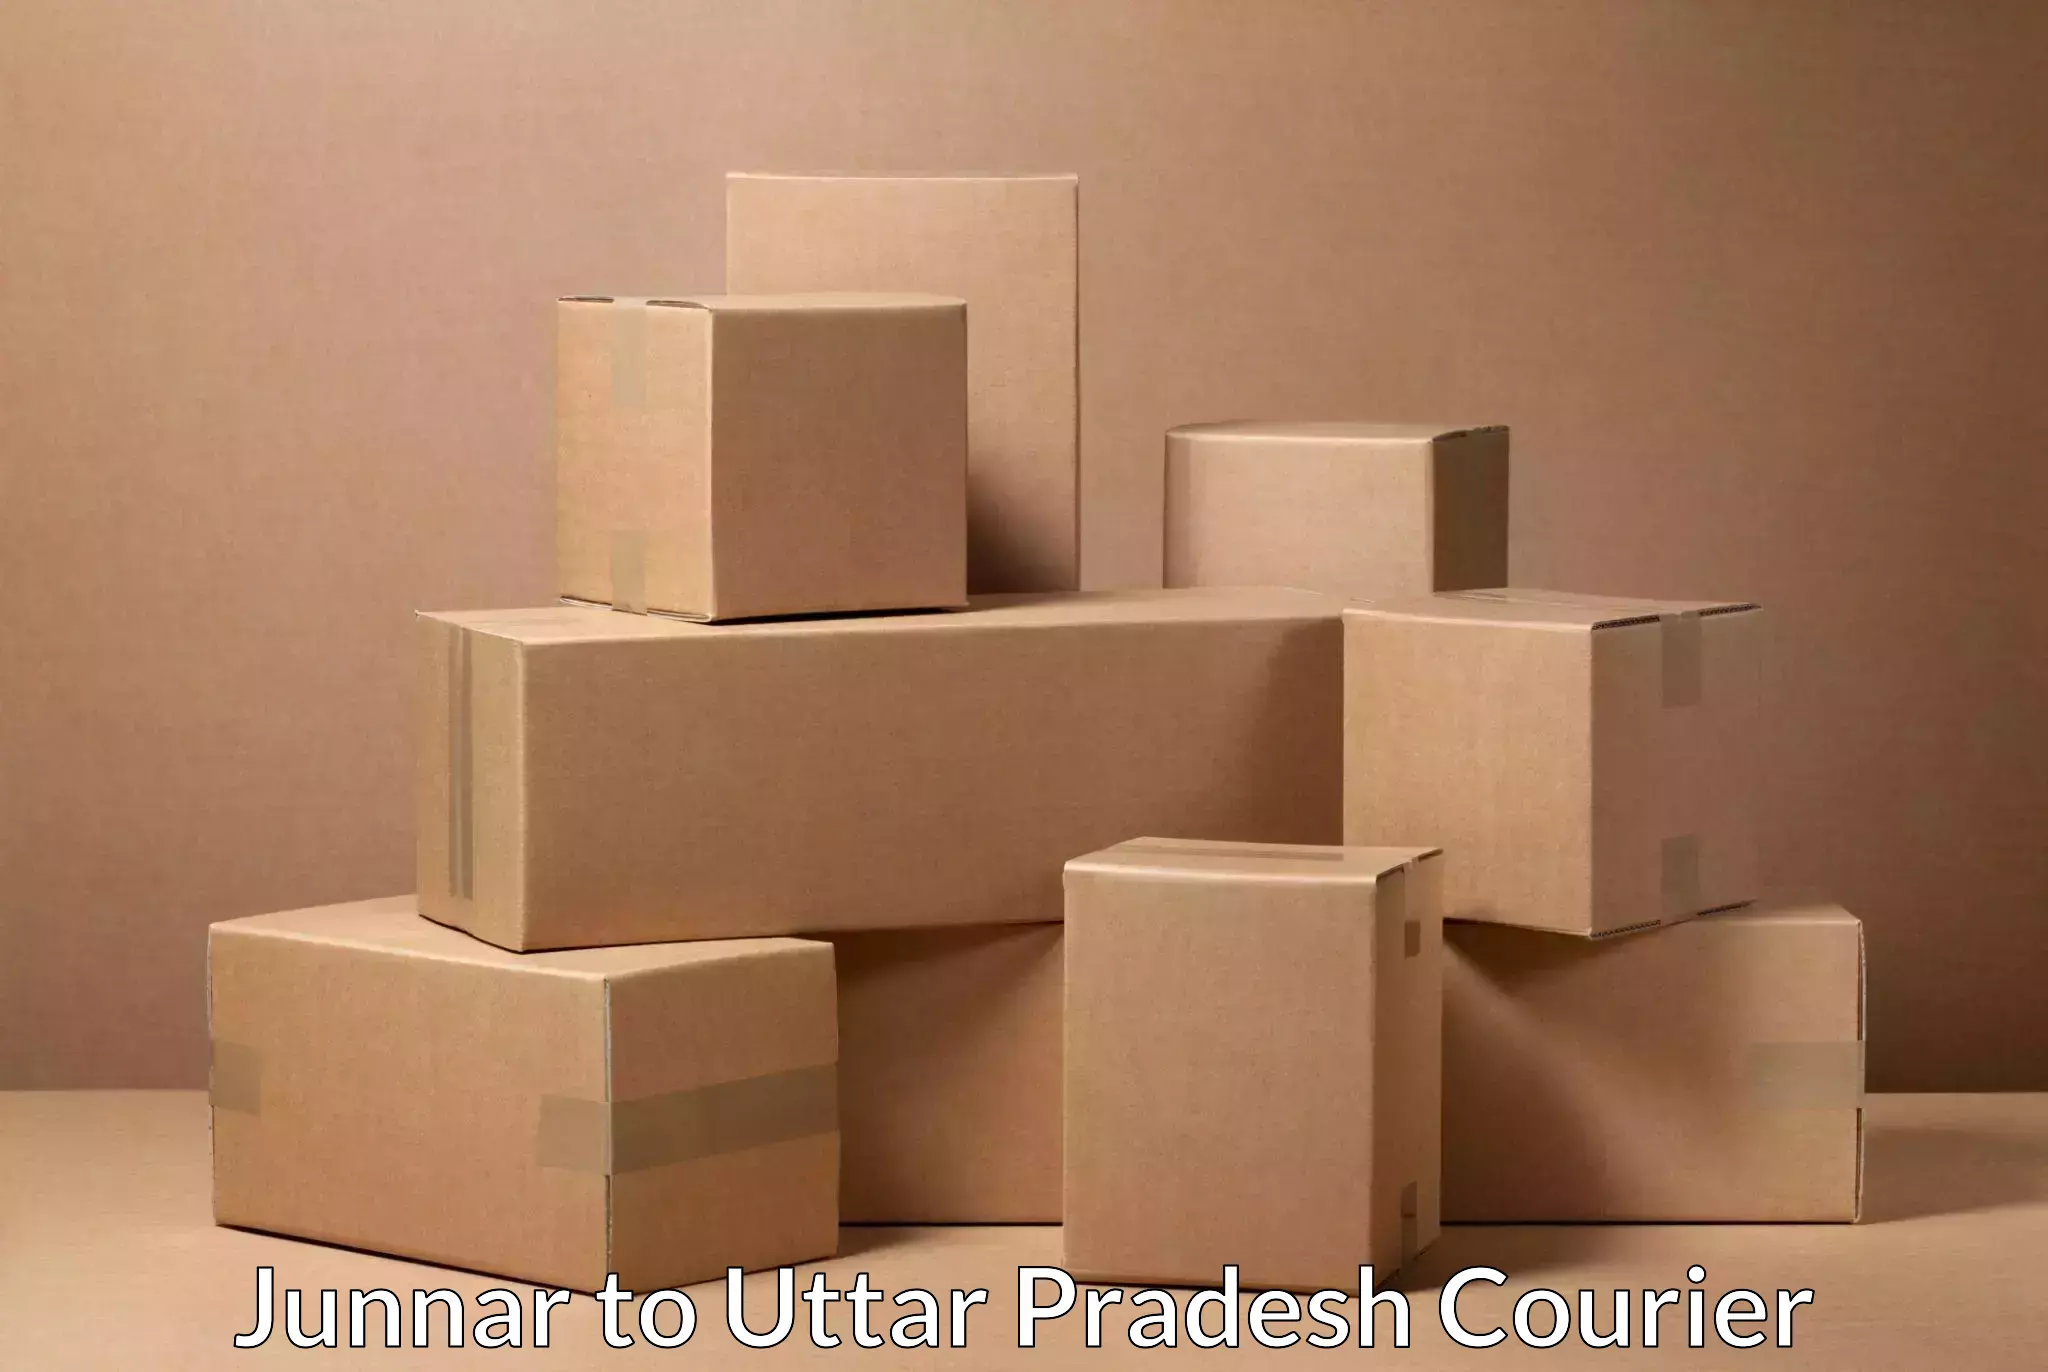 State-of-the-art courier technology Junnar to Kheragarh